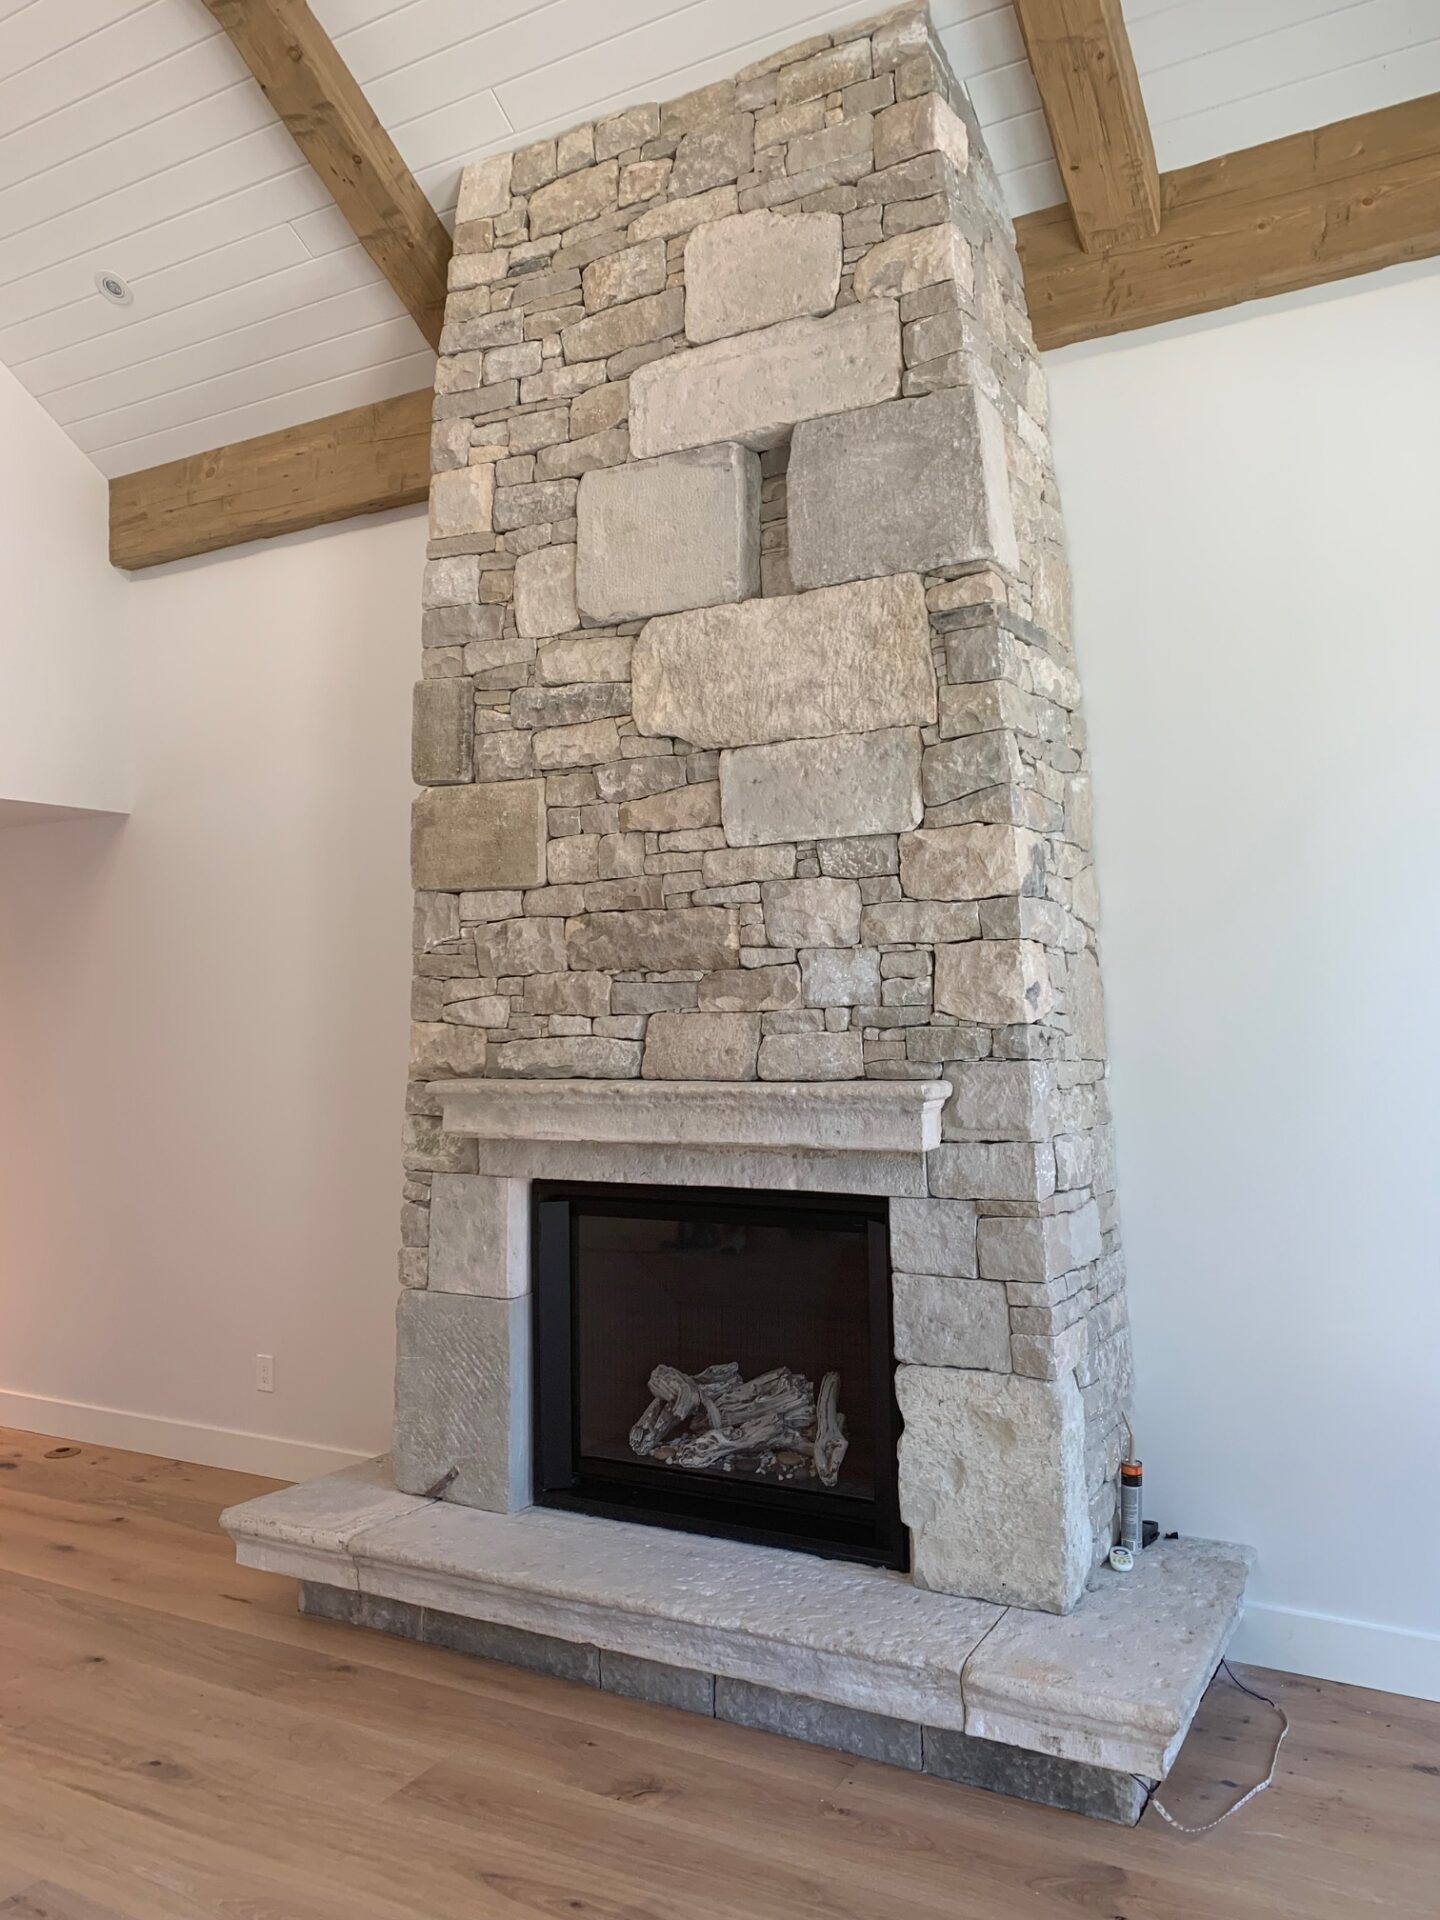 A spacious room with a high ceiling and wooden beams, featuring a large stone fireplace with a closed gas insert and a hardwood floor.